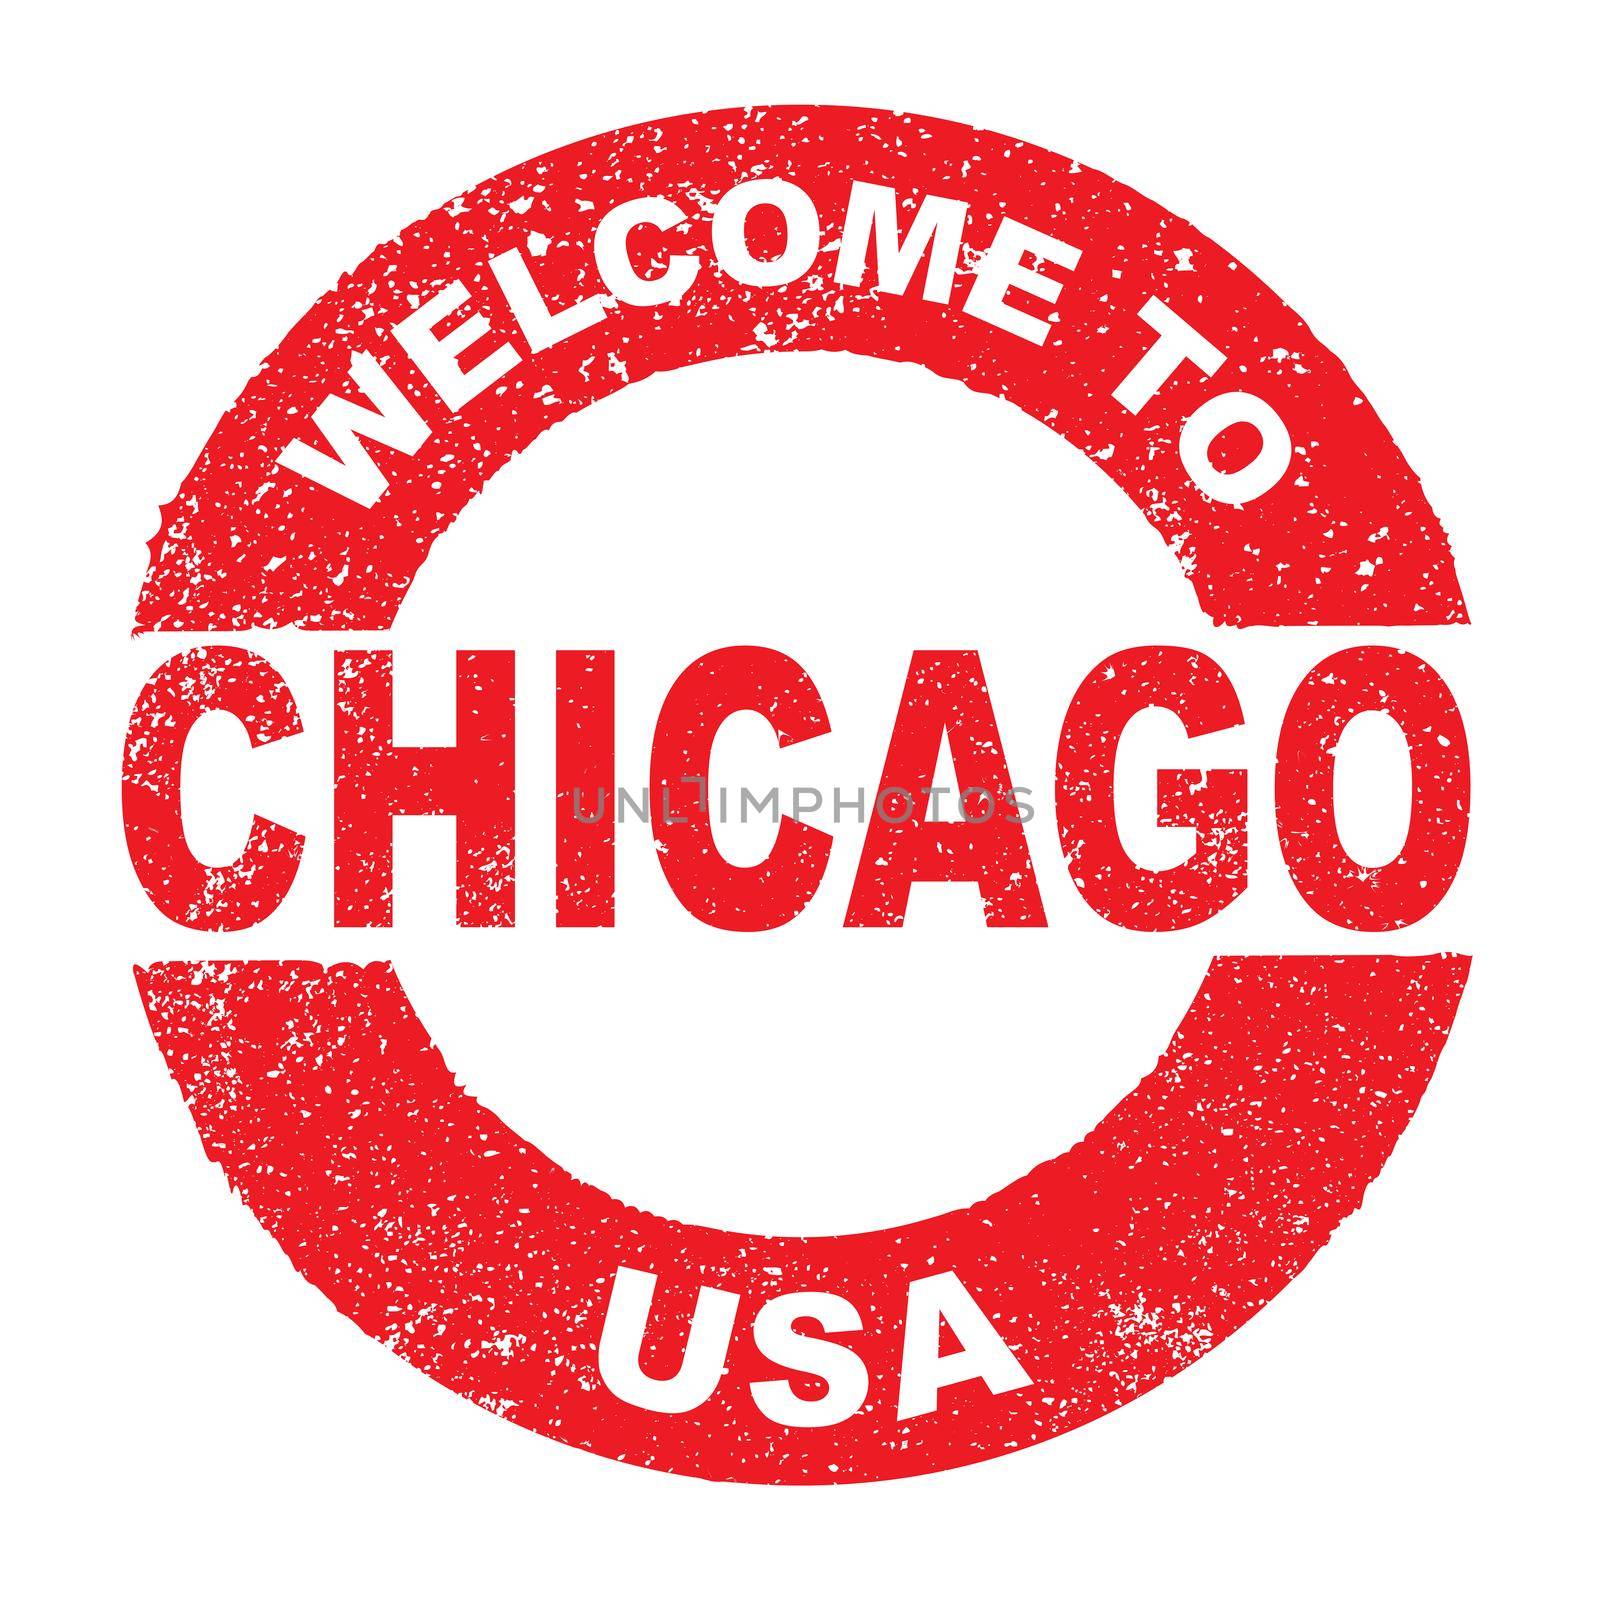 A grunge rubber ink stamp with the text Welcome To Chicago USA over a white background